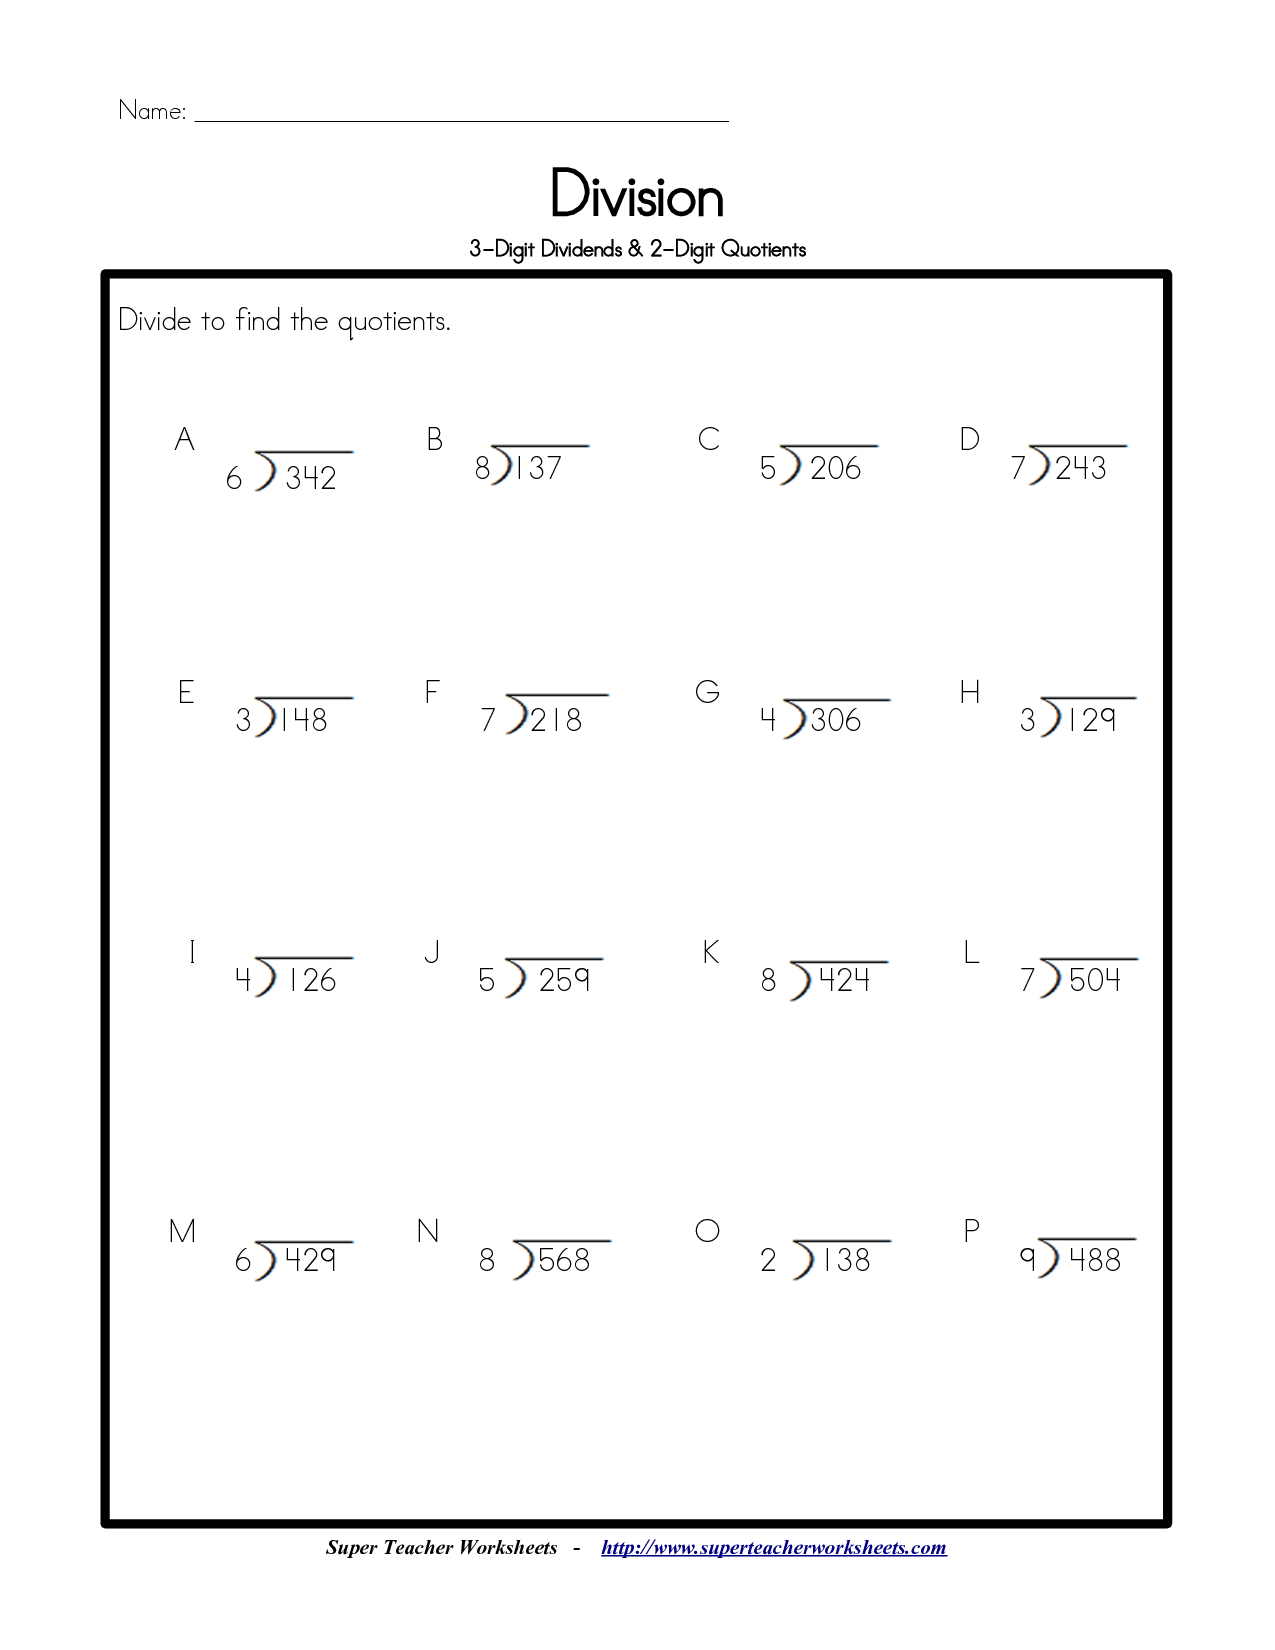 12 Division 3 Digits With Remainders Worksheets Worksheeto